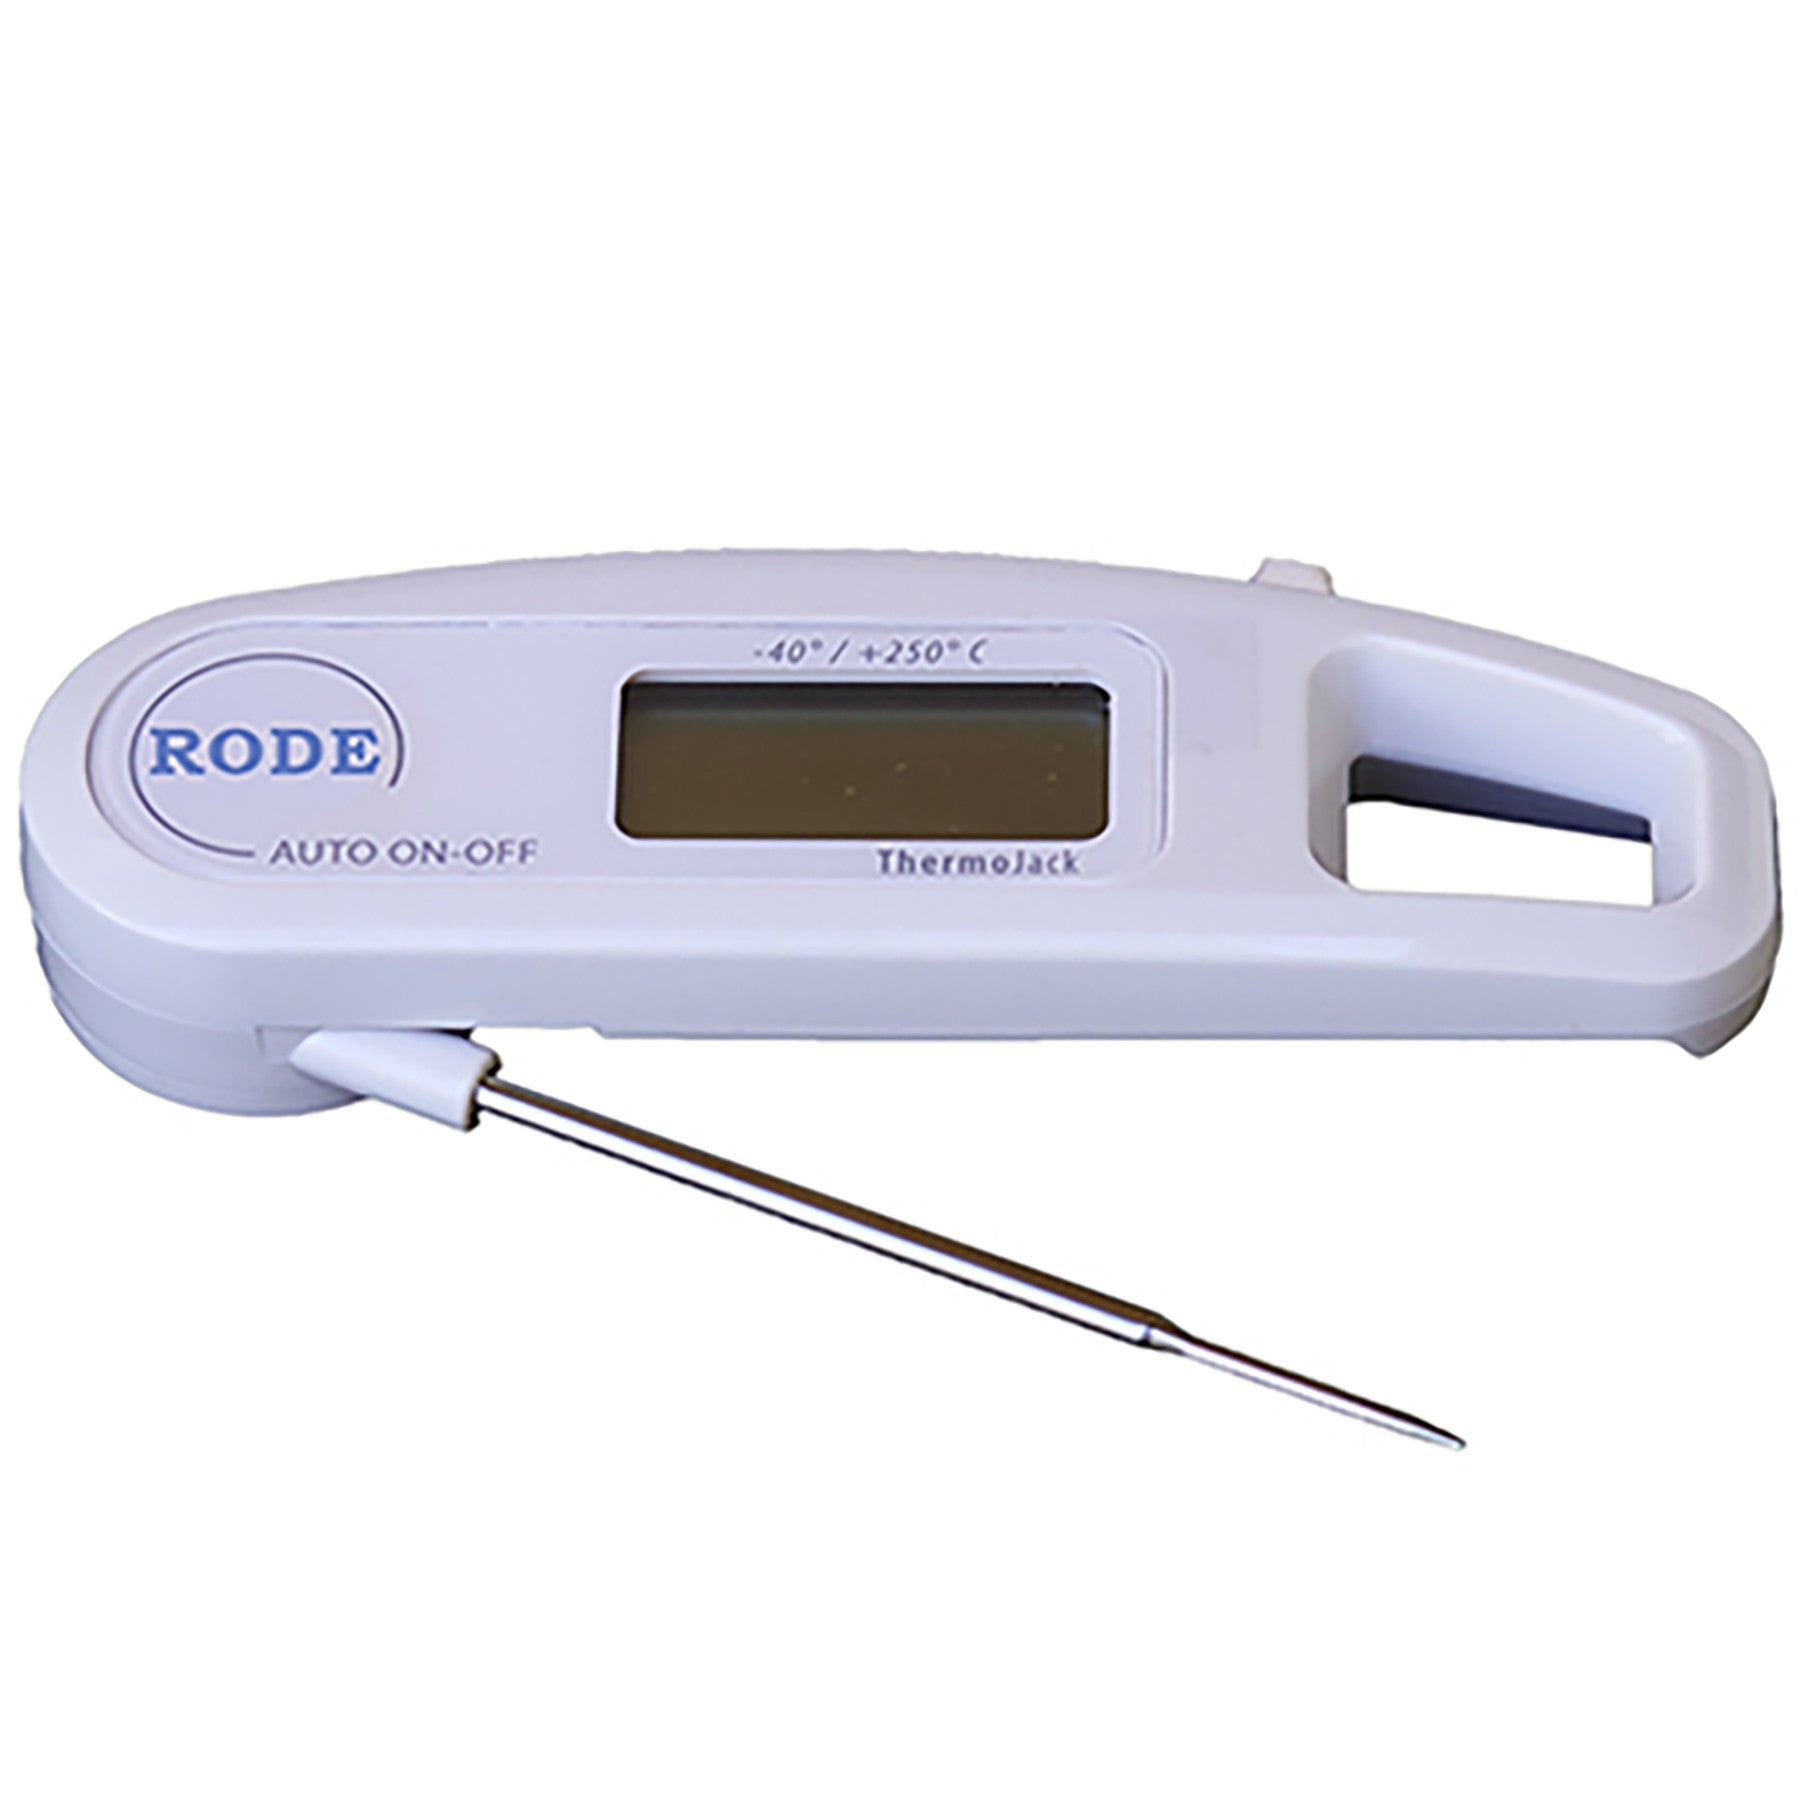 Rode DIGITAL THERMOMETER